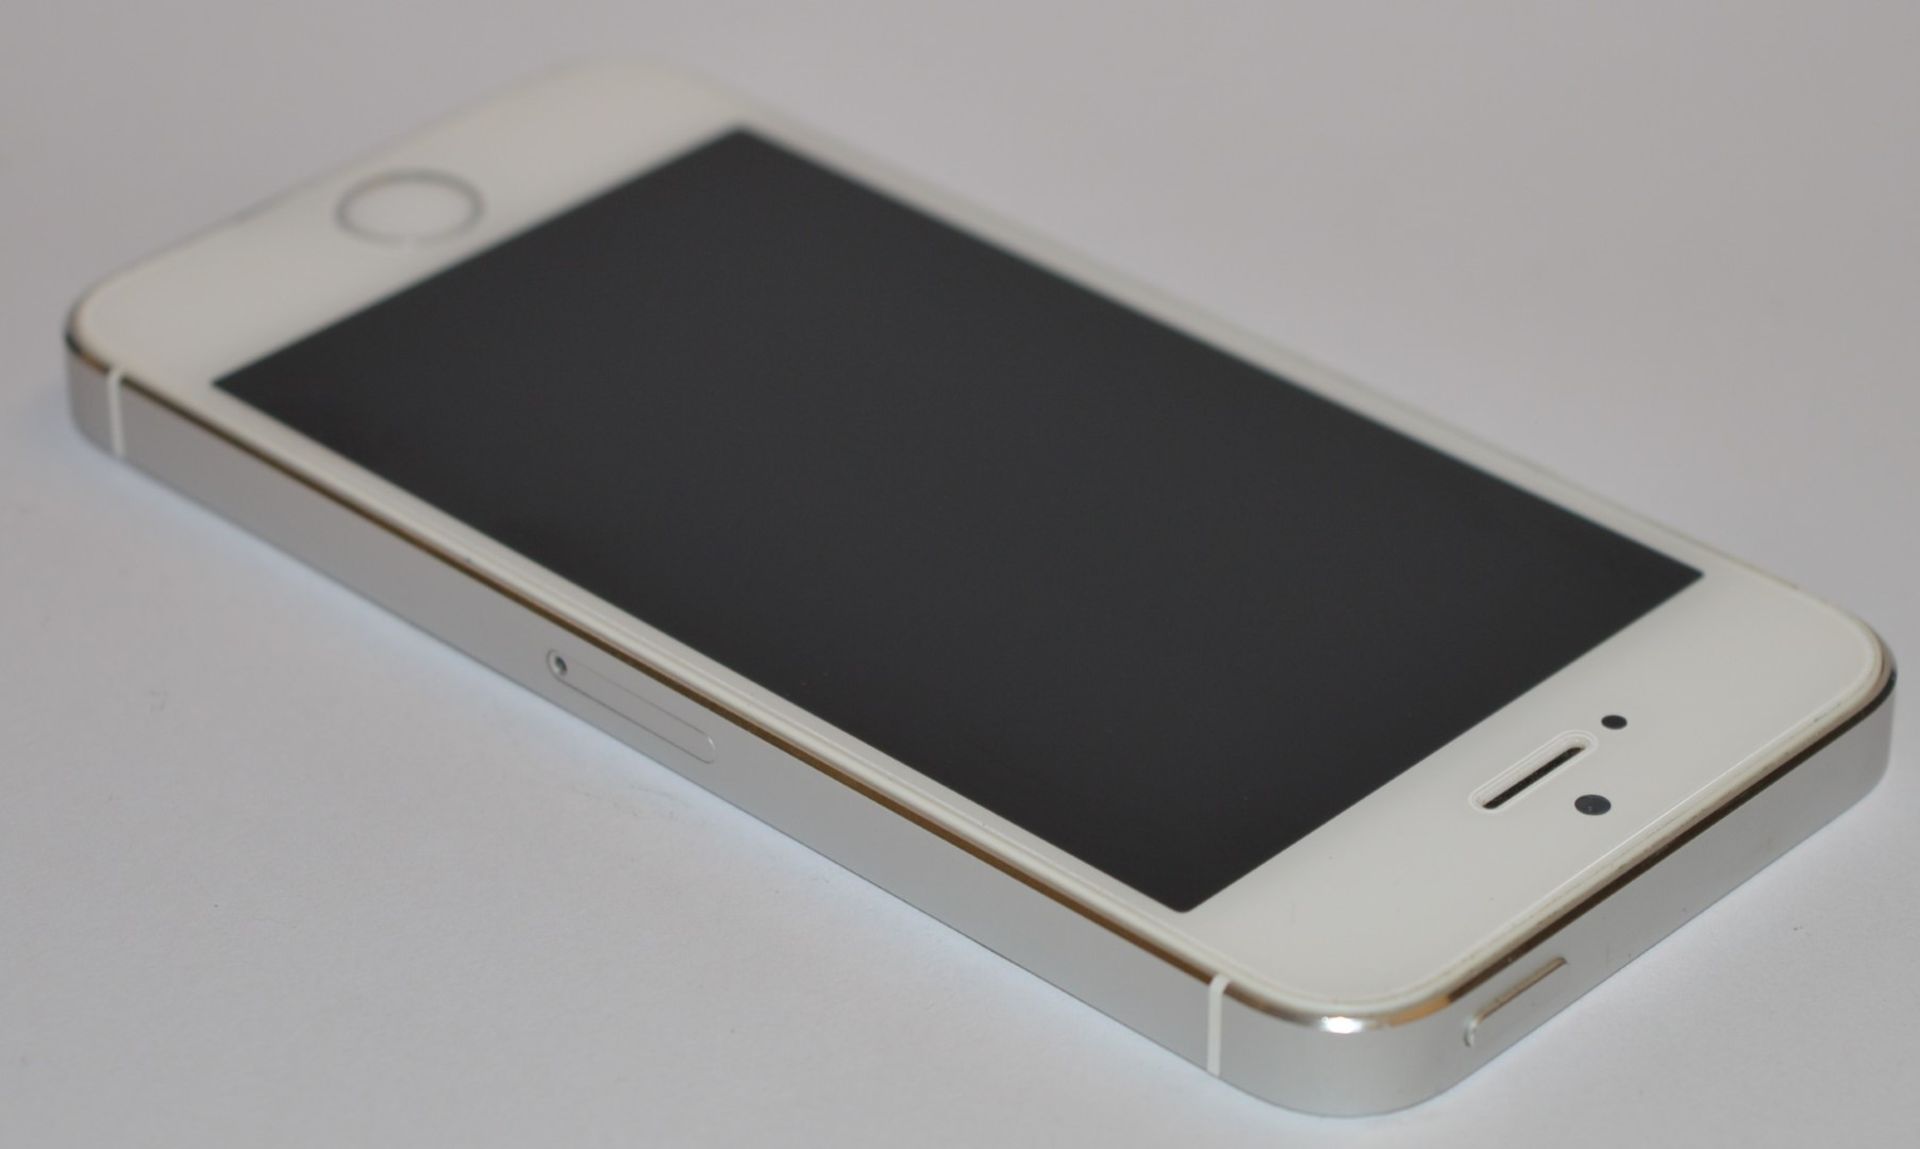 1 x Apple Iphone 5S White 32gb Mobile Phone - Model A1457 - Excellent Cosmetic Condition - Good - Image 9 of 15